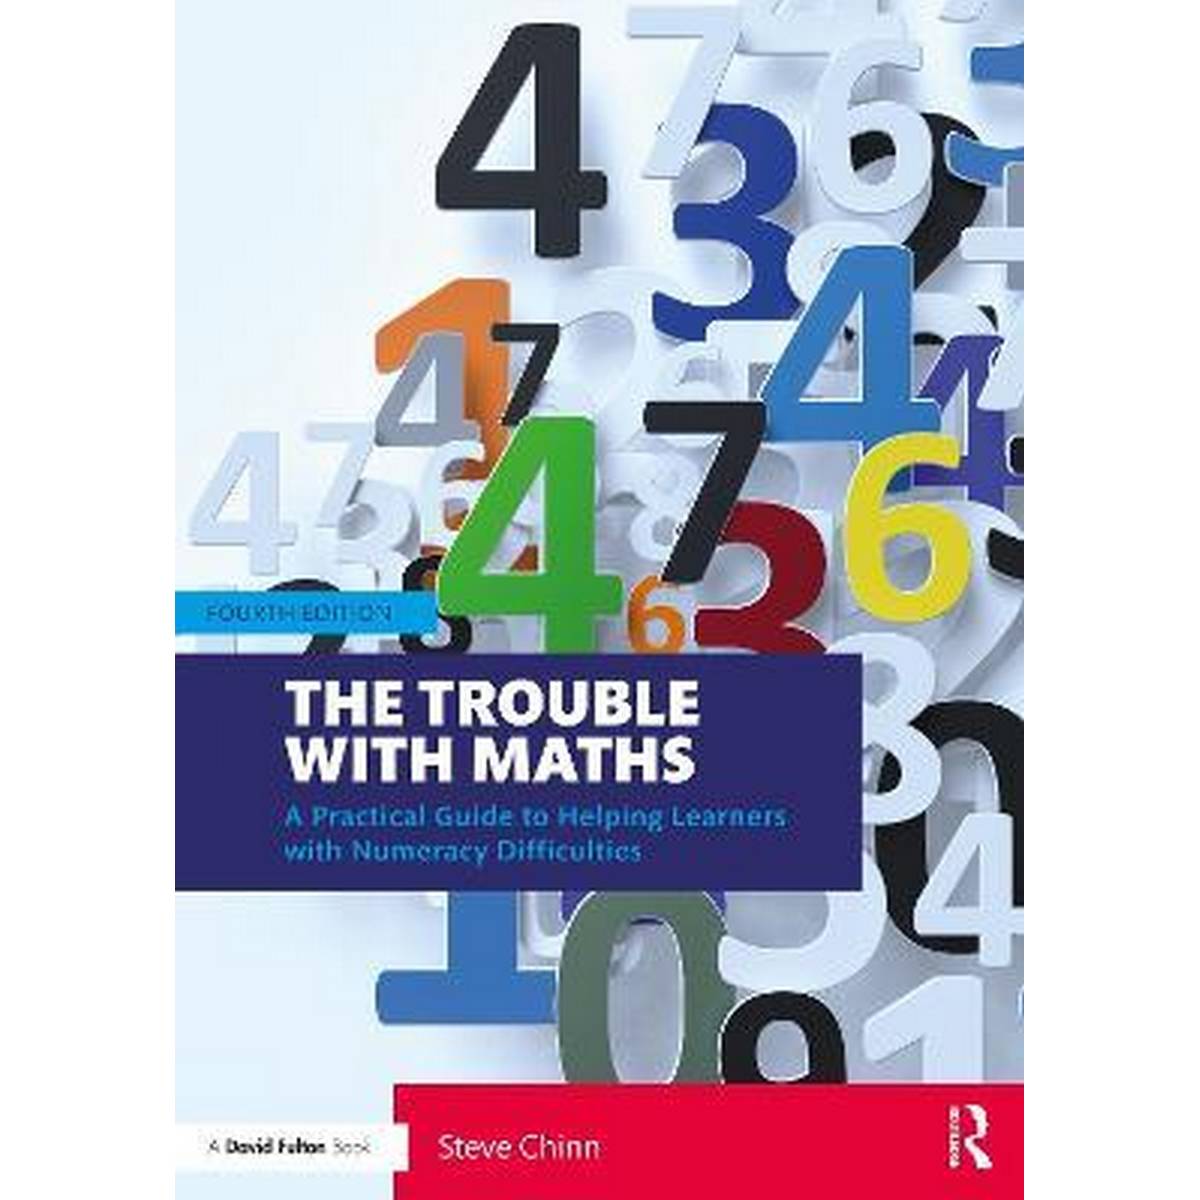 The Trouble with Maths : A Practical Guide to Helping Learners with Numeracy Difficulties